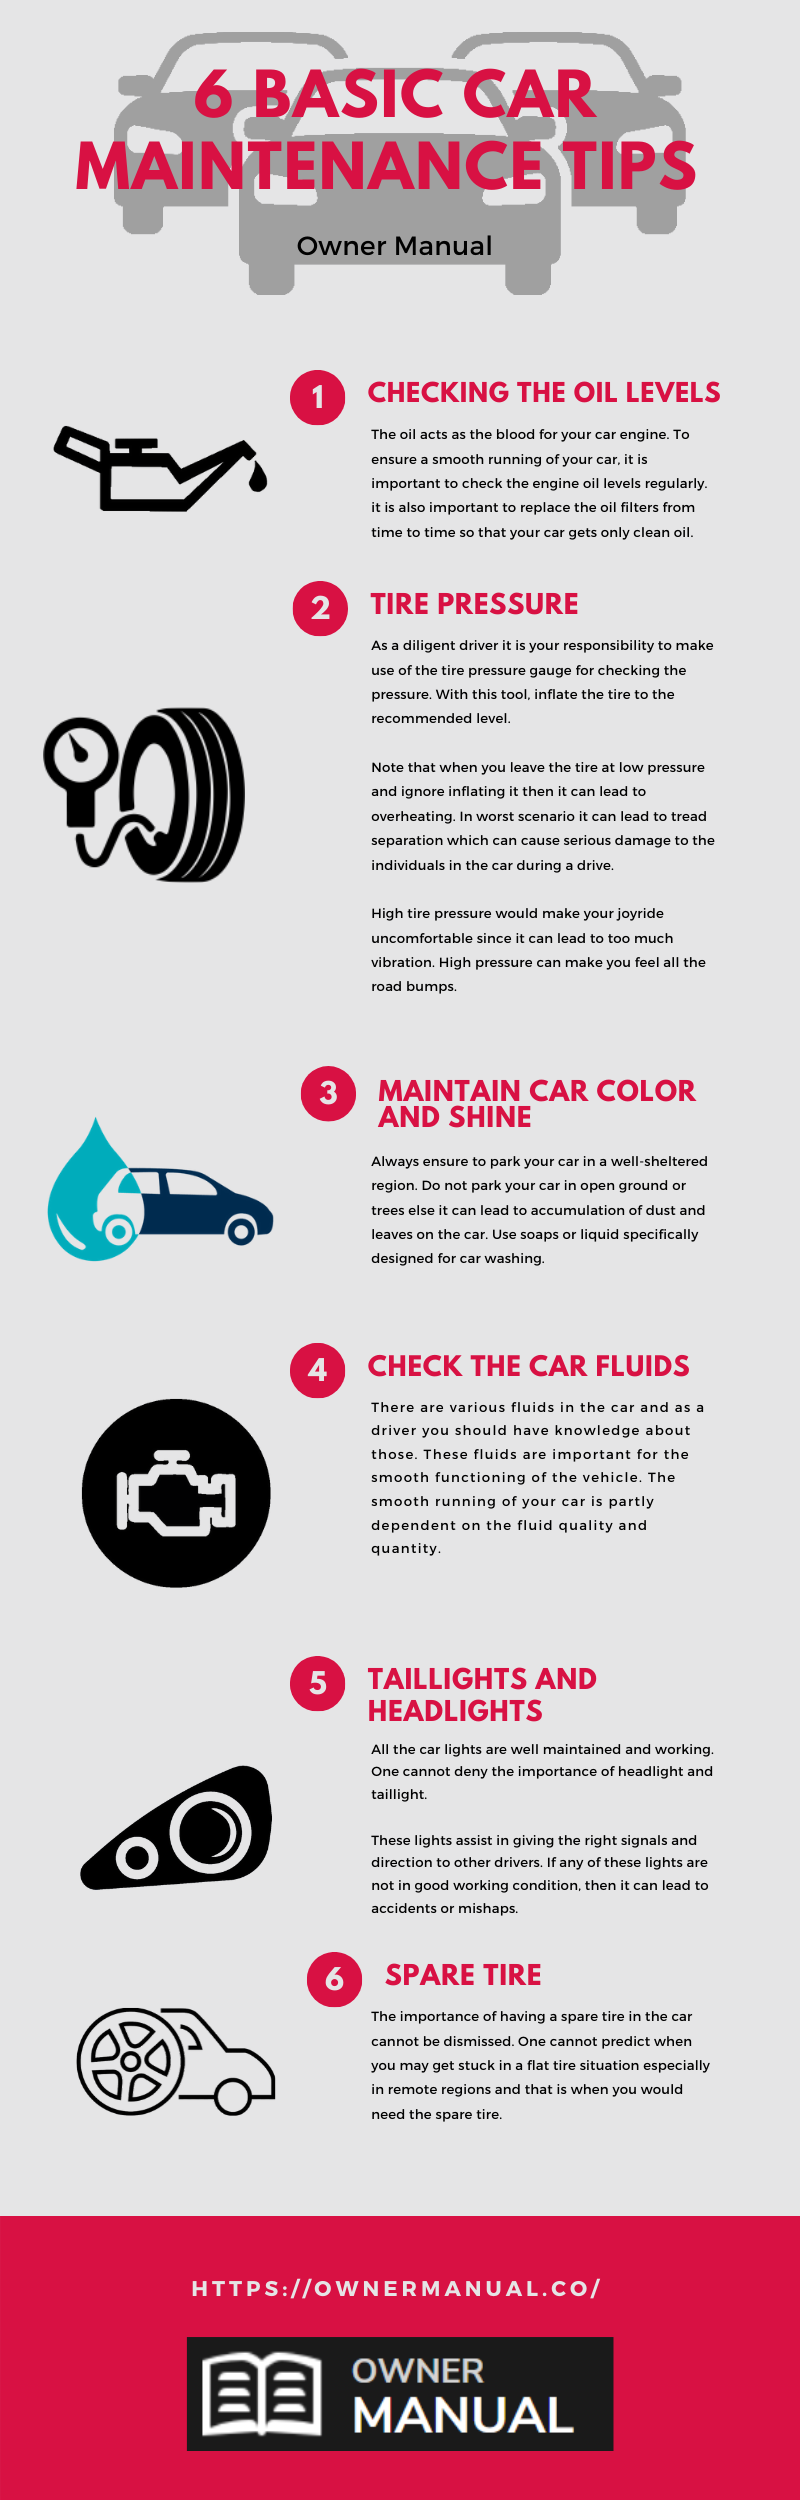 6 Basic Car Maintenance Tips Every Driver Should Know | Owner Manual